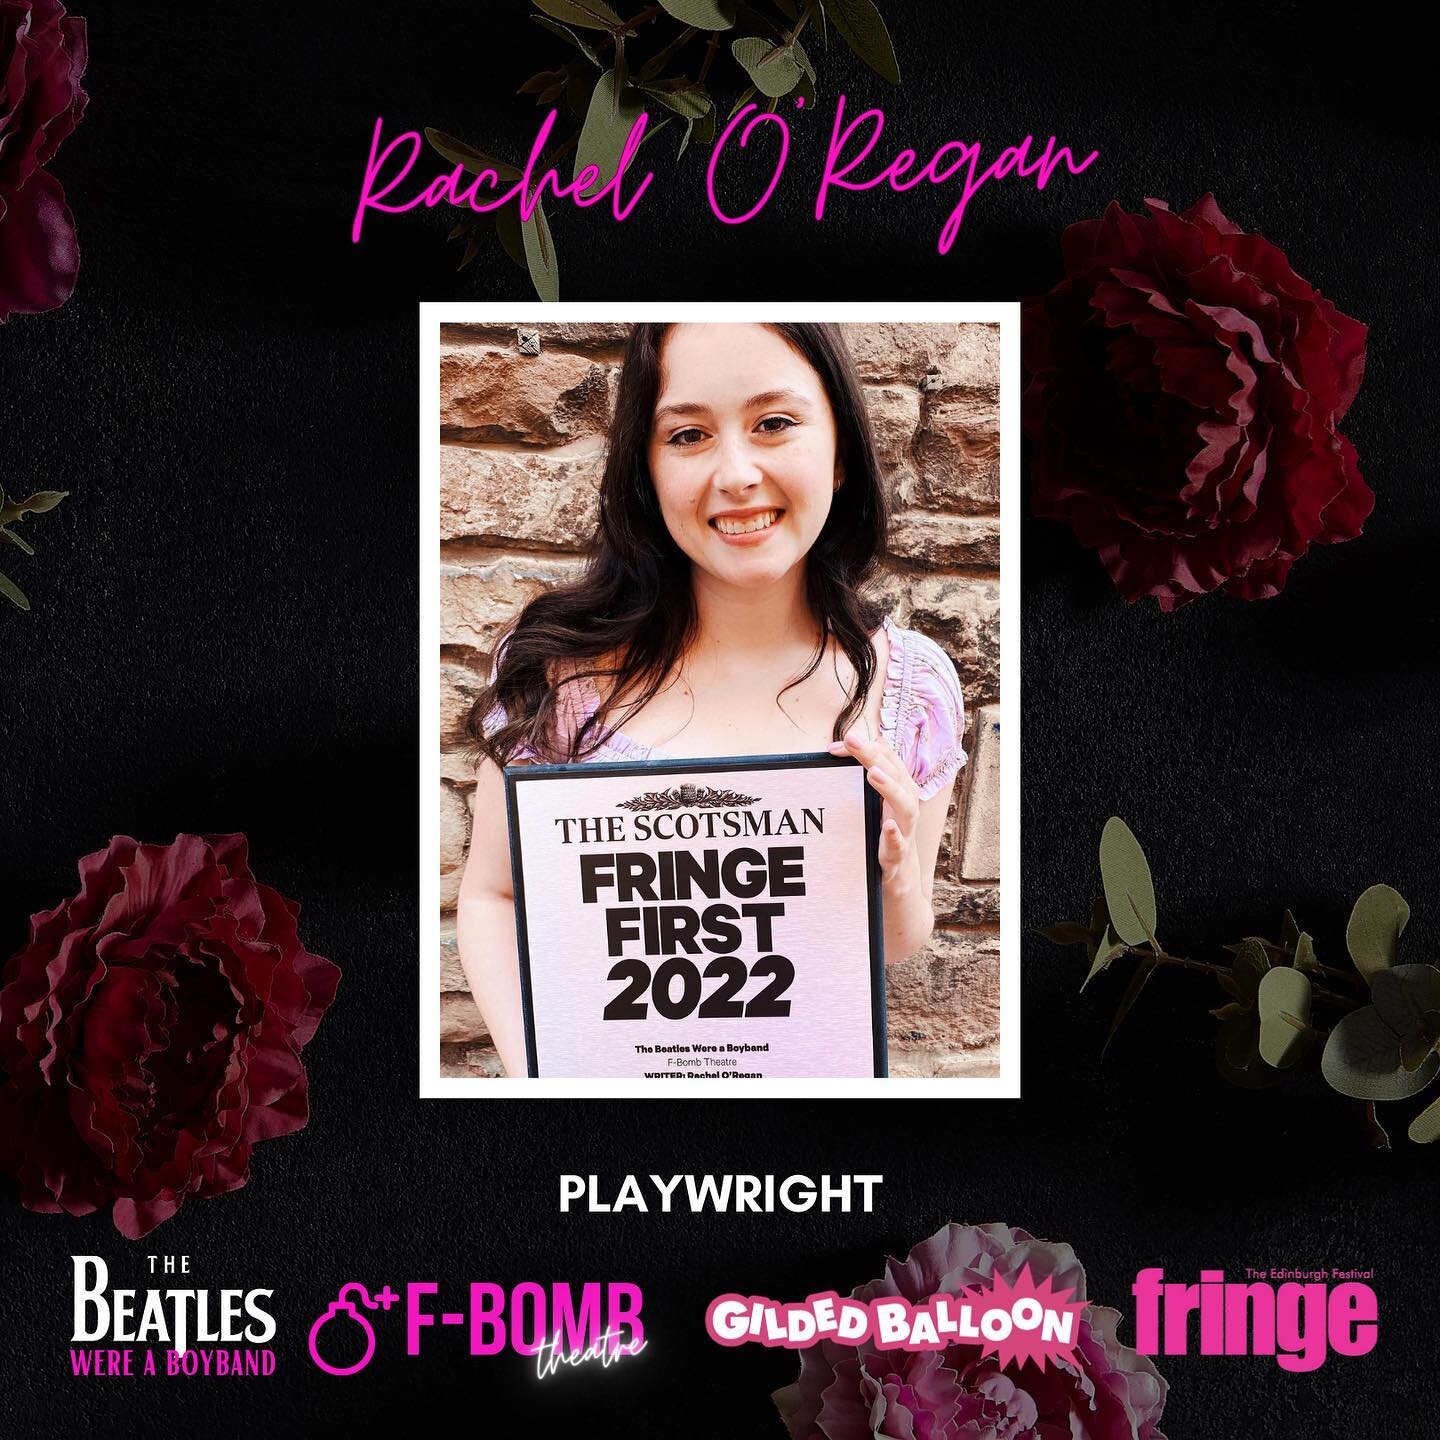 Meet the playwright of THE BEATLES WERE A BOYBAND 🎭 

Rachel O&rsquo;Regan @rach.writes.plays is an award-winning playwright based in Edinburgh. Since 2017 she has been growing her artistic practice, with her first play &quot;Hungerland&quot; winnin